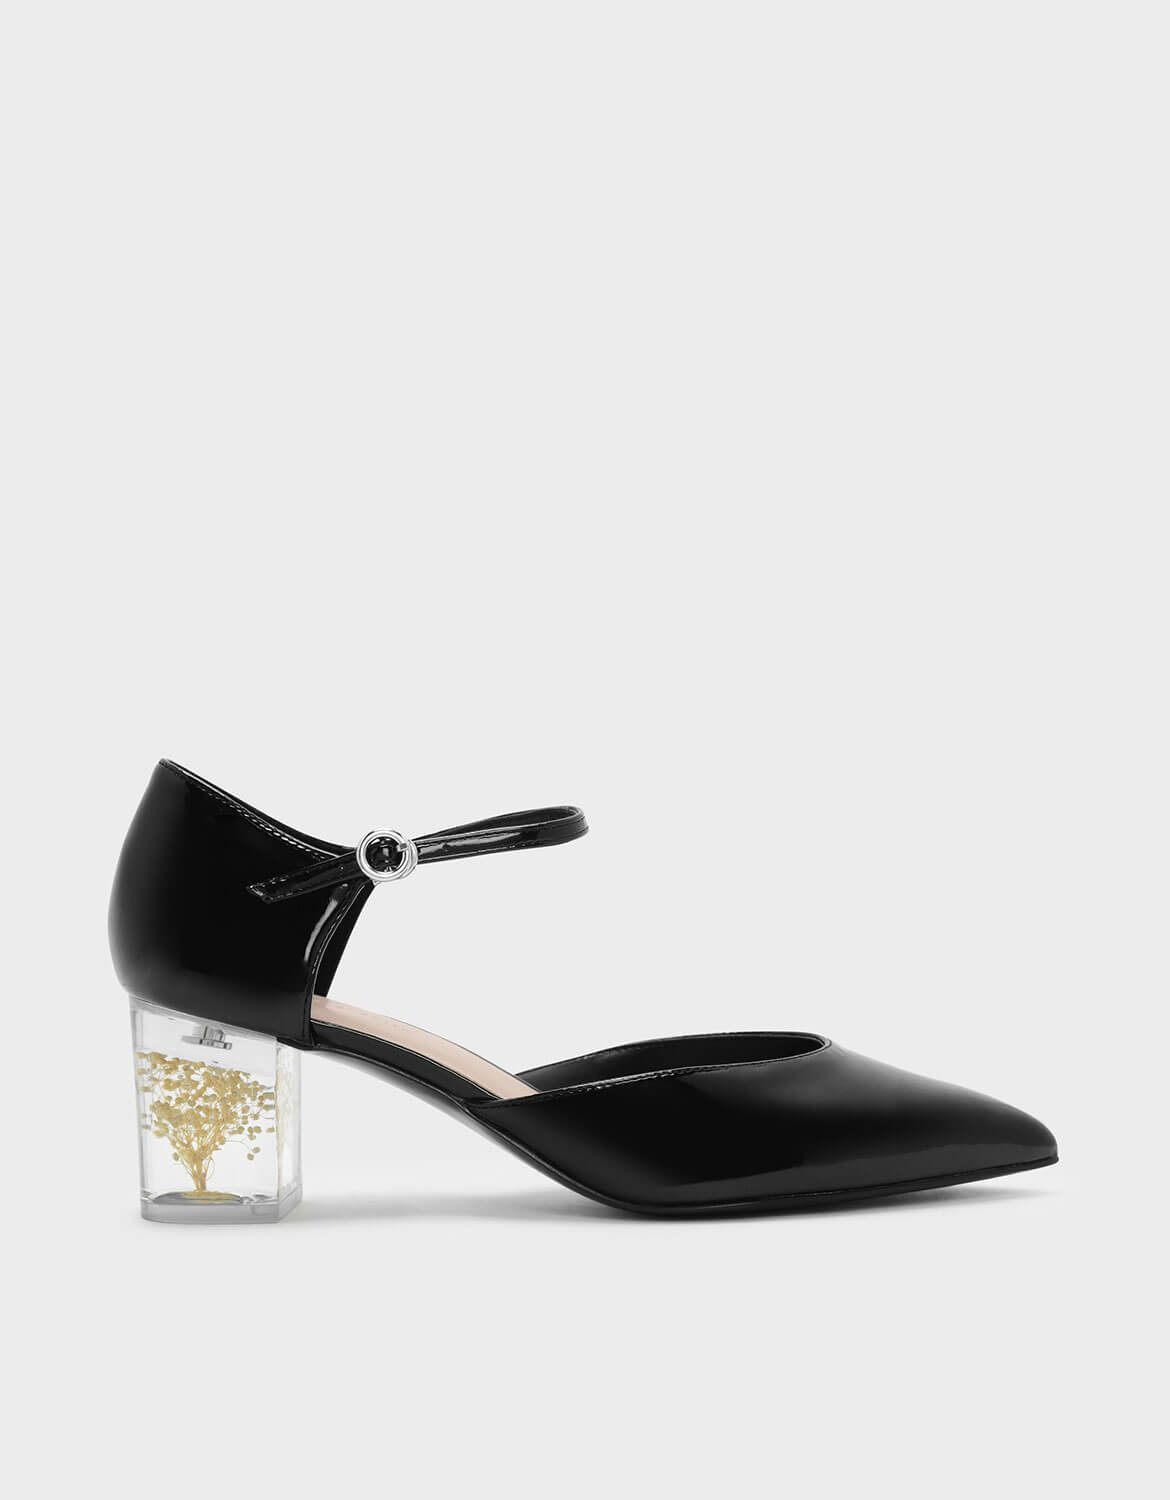 CHARLES \u0026 KEITH Floral Lucite Heel Mary 